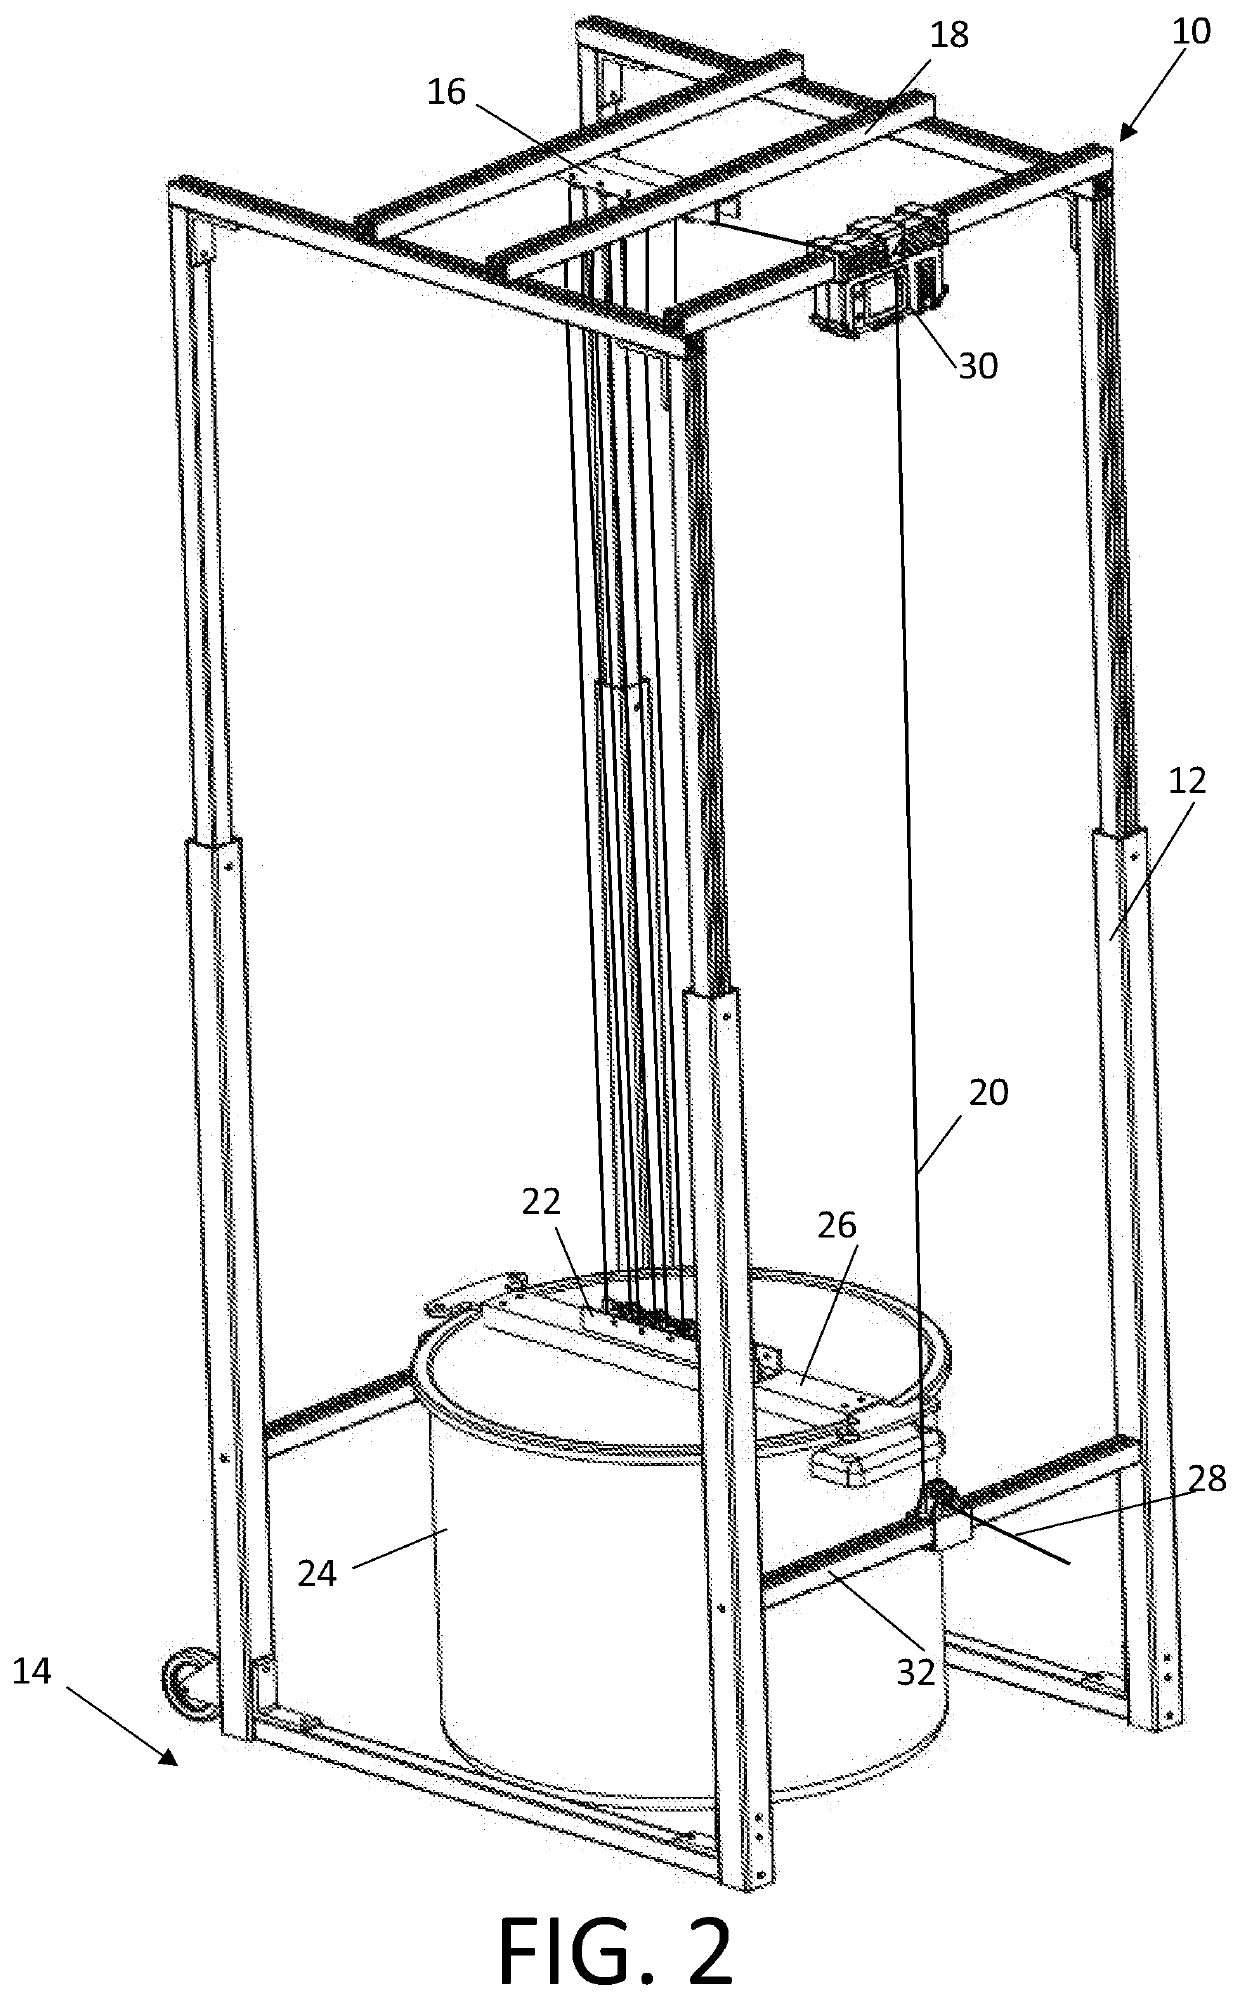 Tethered resistance swim training apparatus with smart pulley